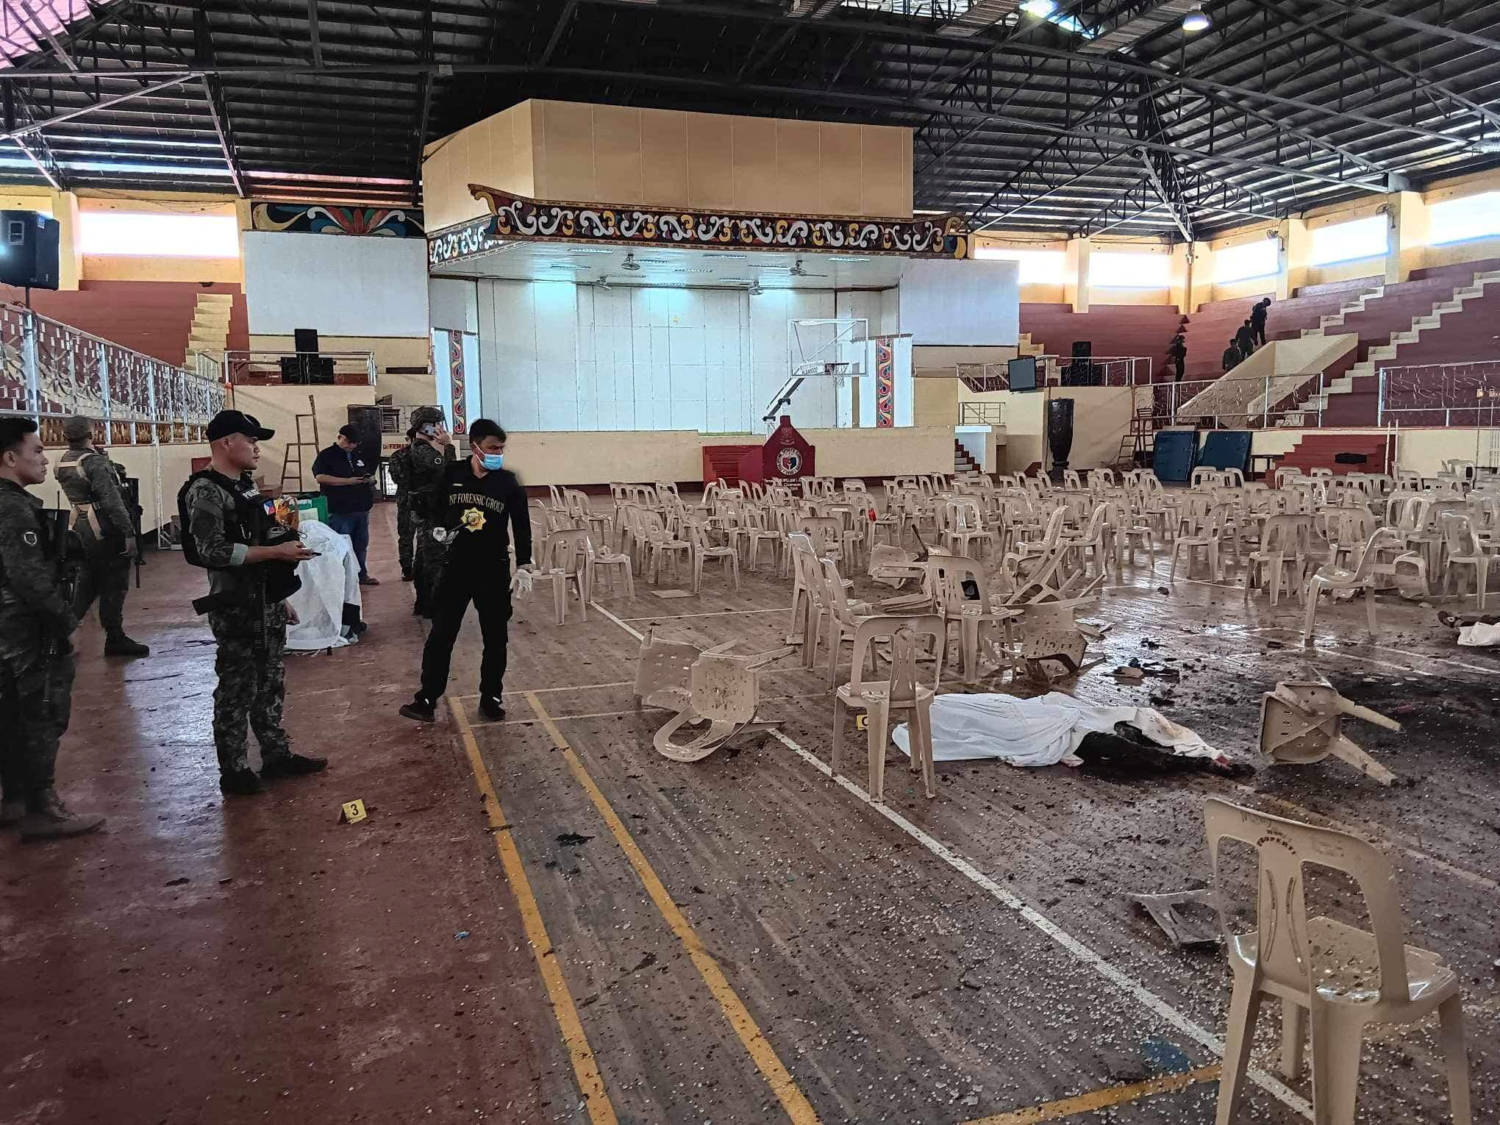 Aftermath Of Explosion During A Catholic Mass At Mindanao State University In Marawi